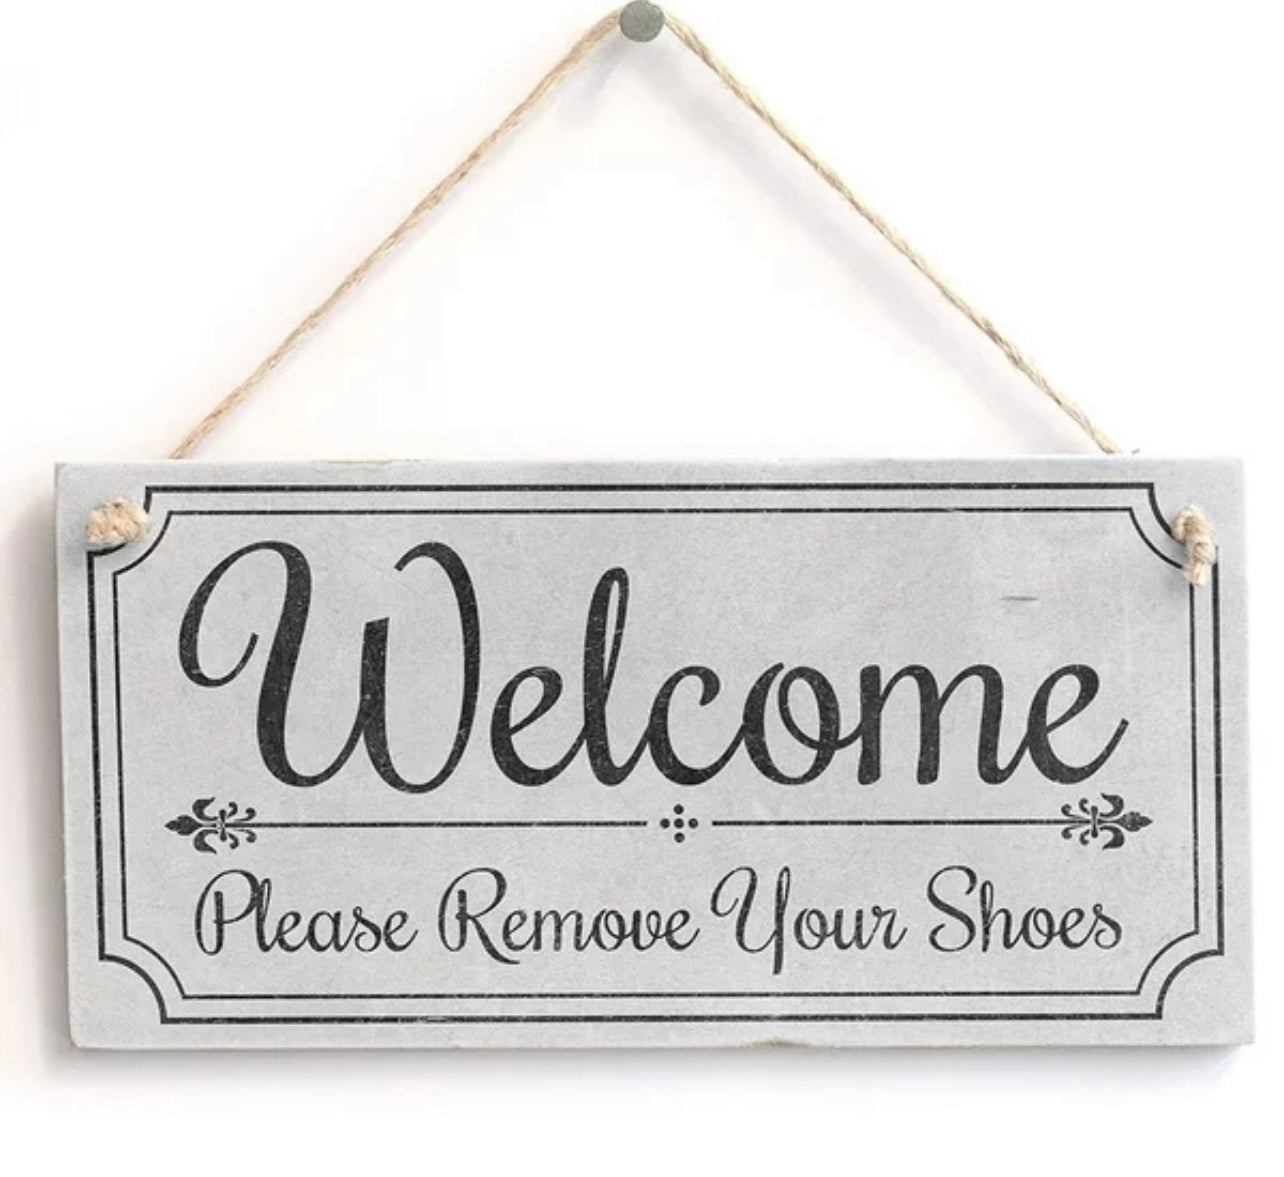 Remove Shoes Reminder sign